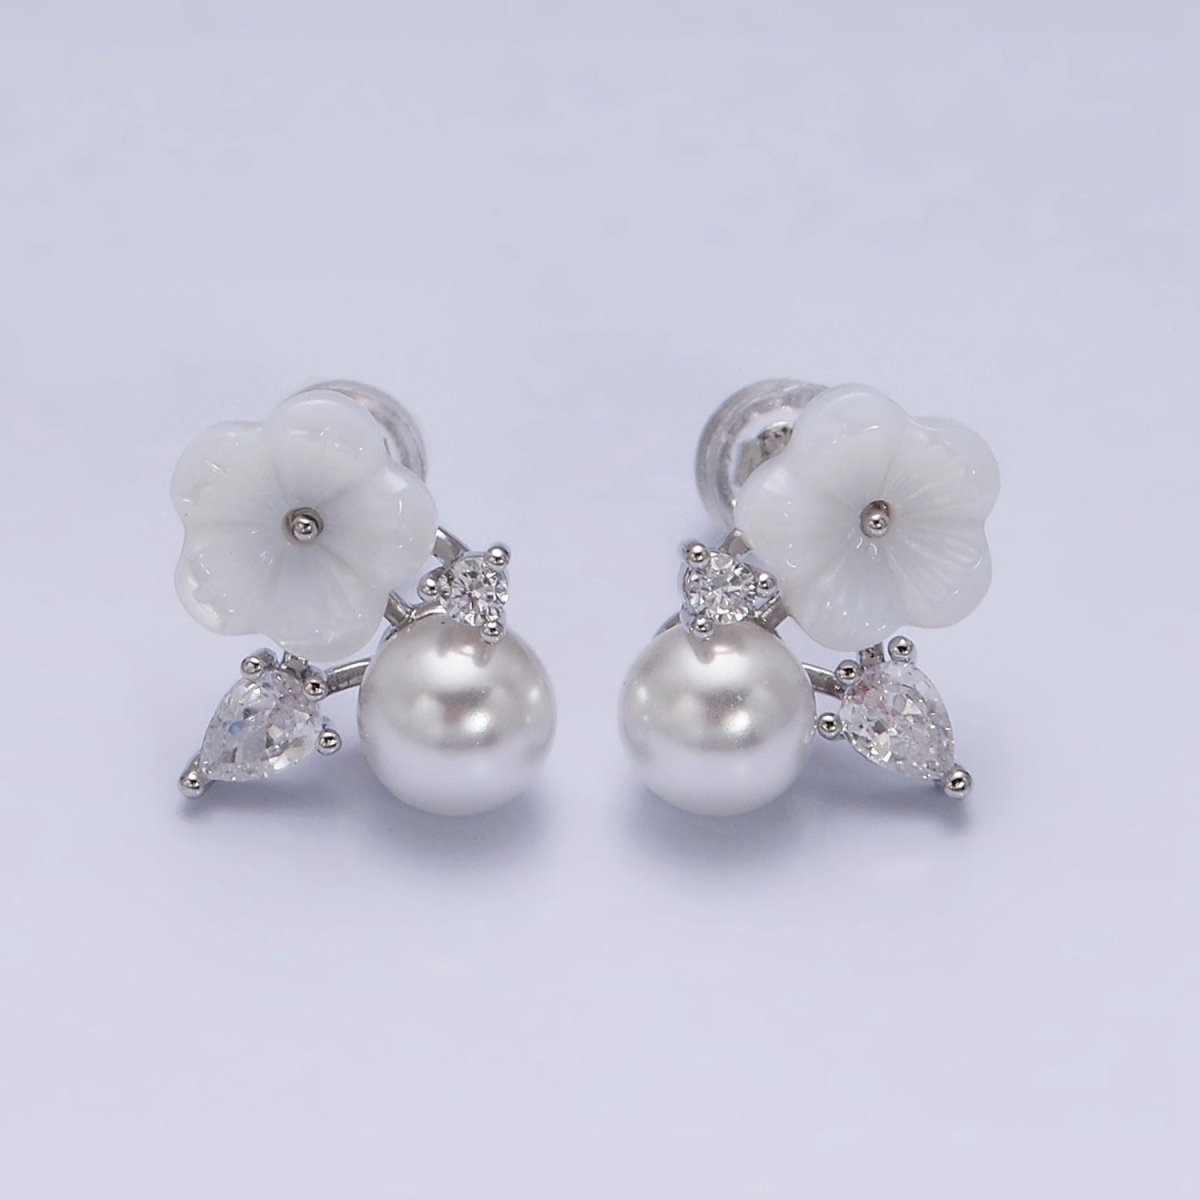 16K Gold Filled White Acrylic Flower Pearl CZ Stud Earrings in Gold & Silver | AD1558 AD1559 - DLUXCA